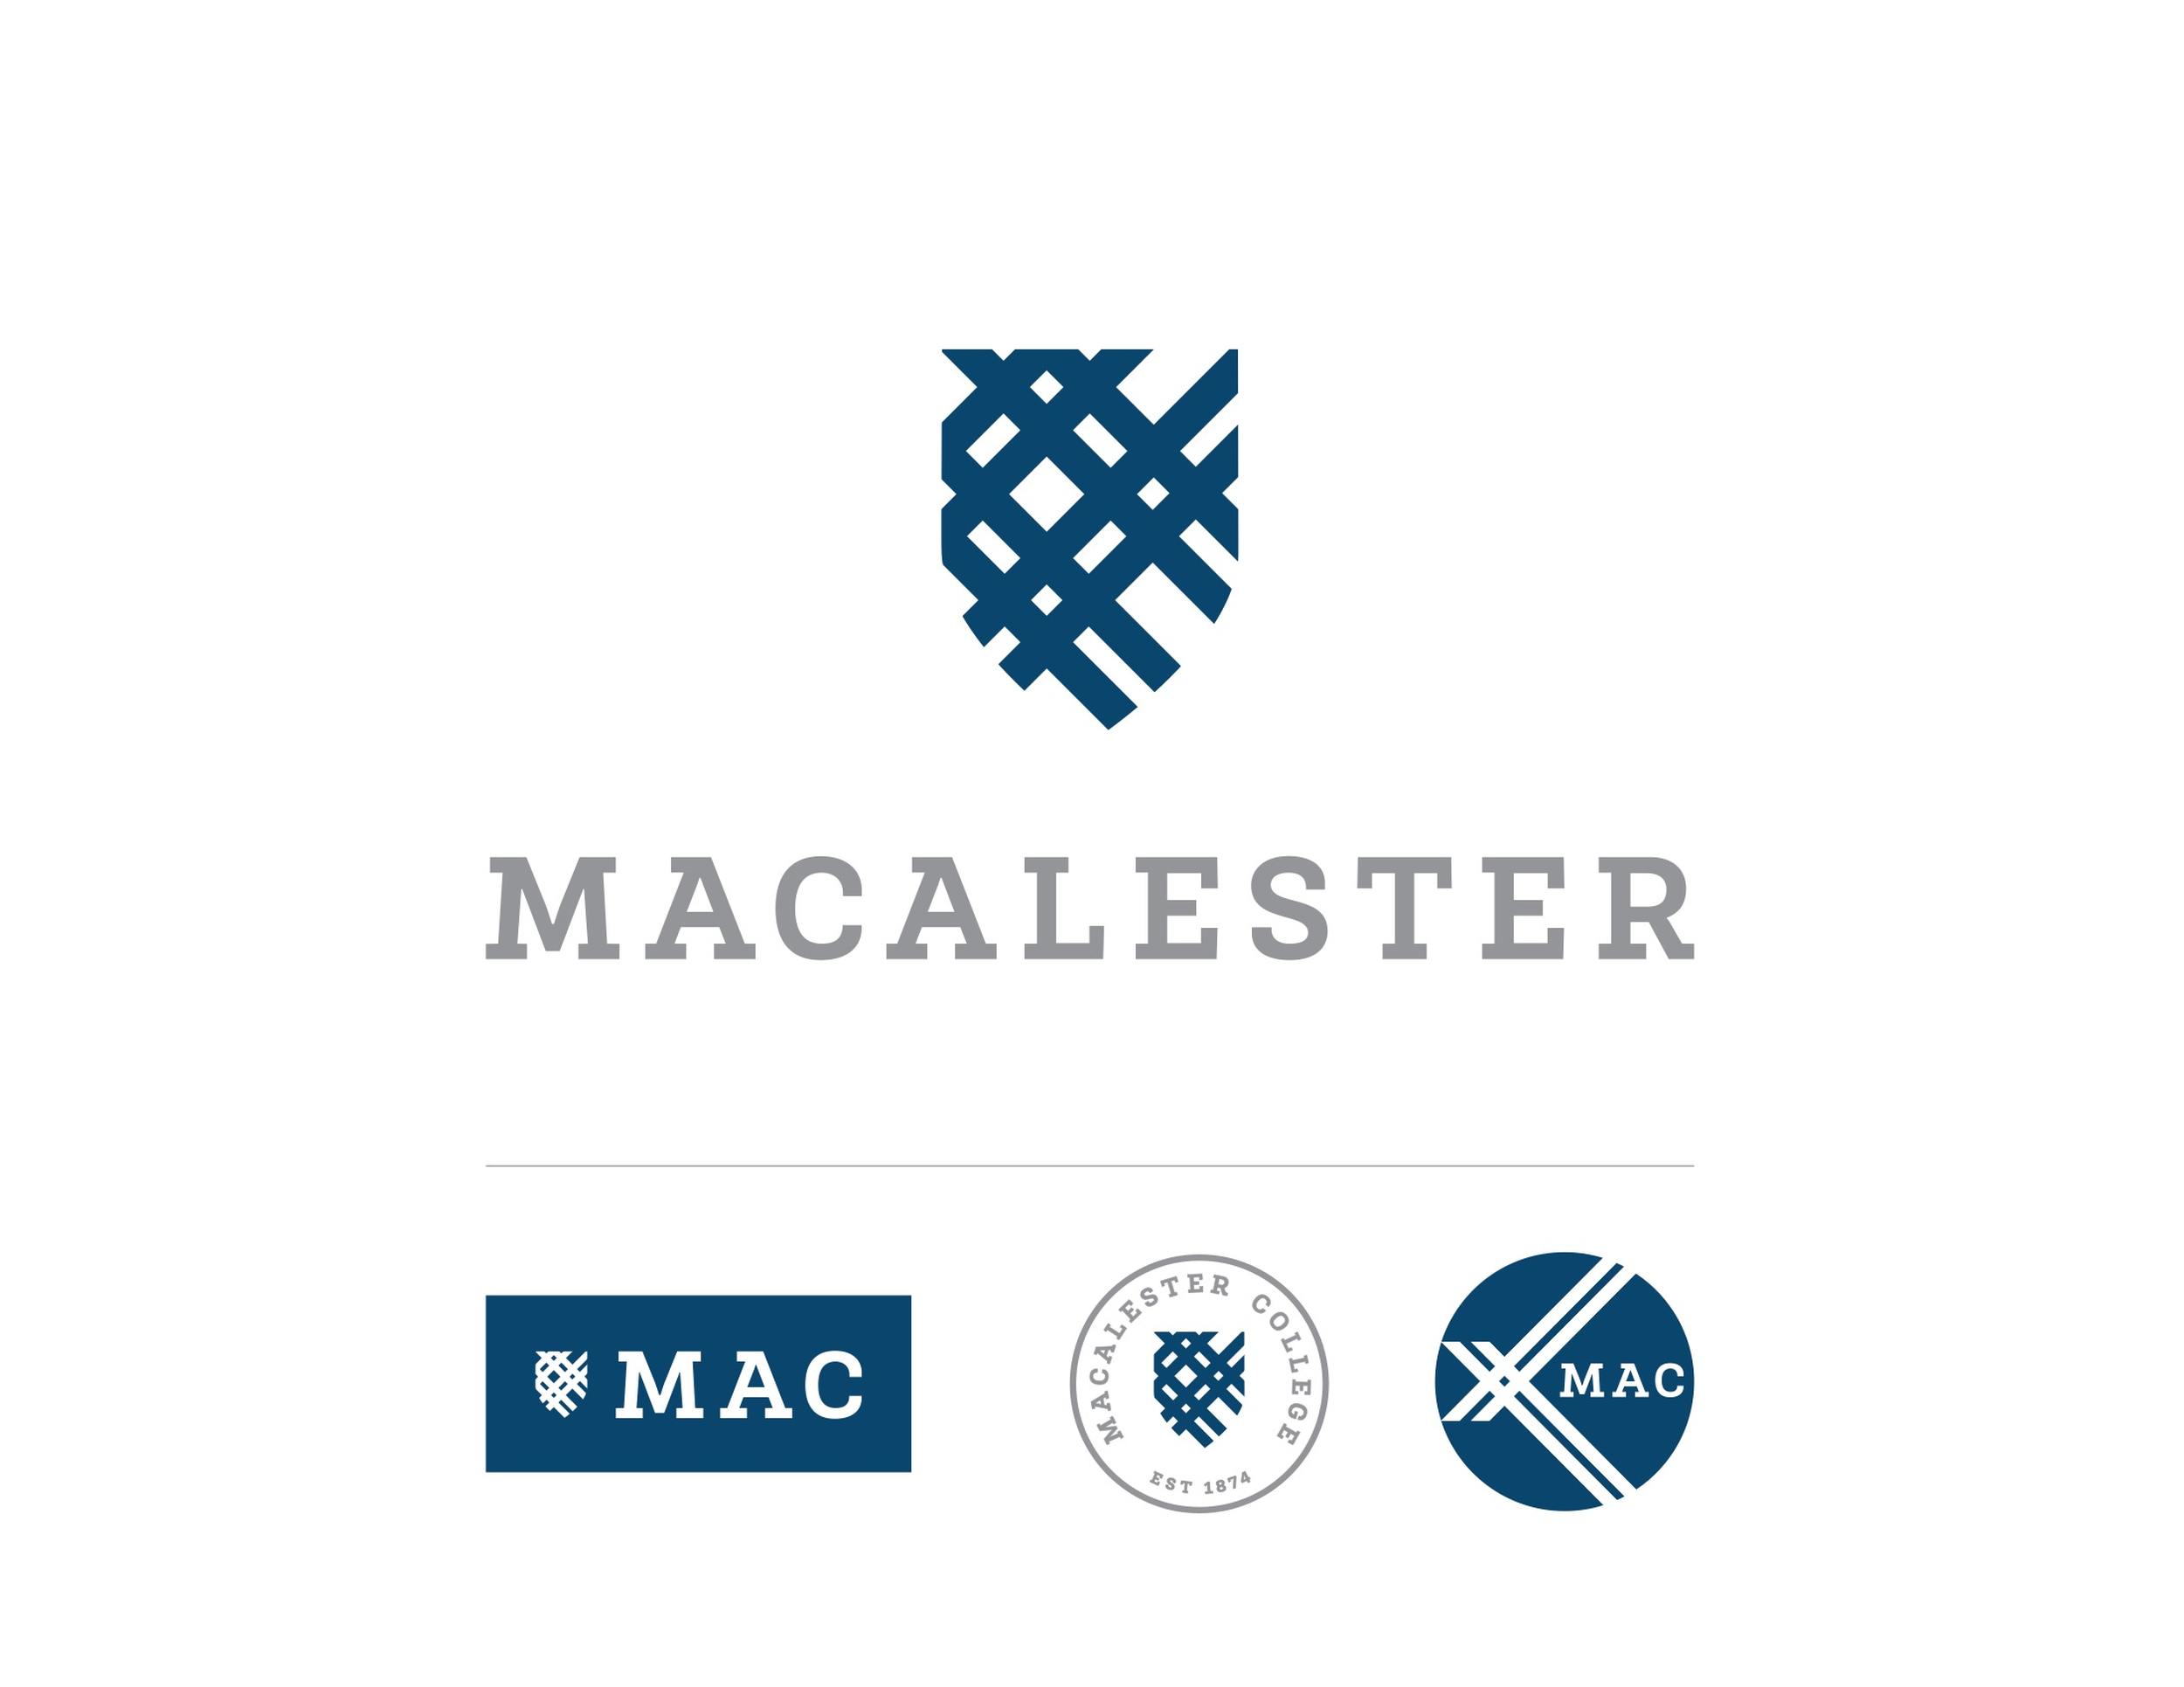 White and Blue College Logo - Macalester College Brand Identity Show MN 2018 Winners